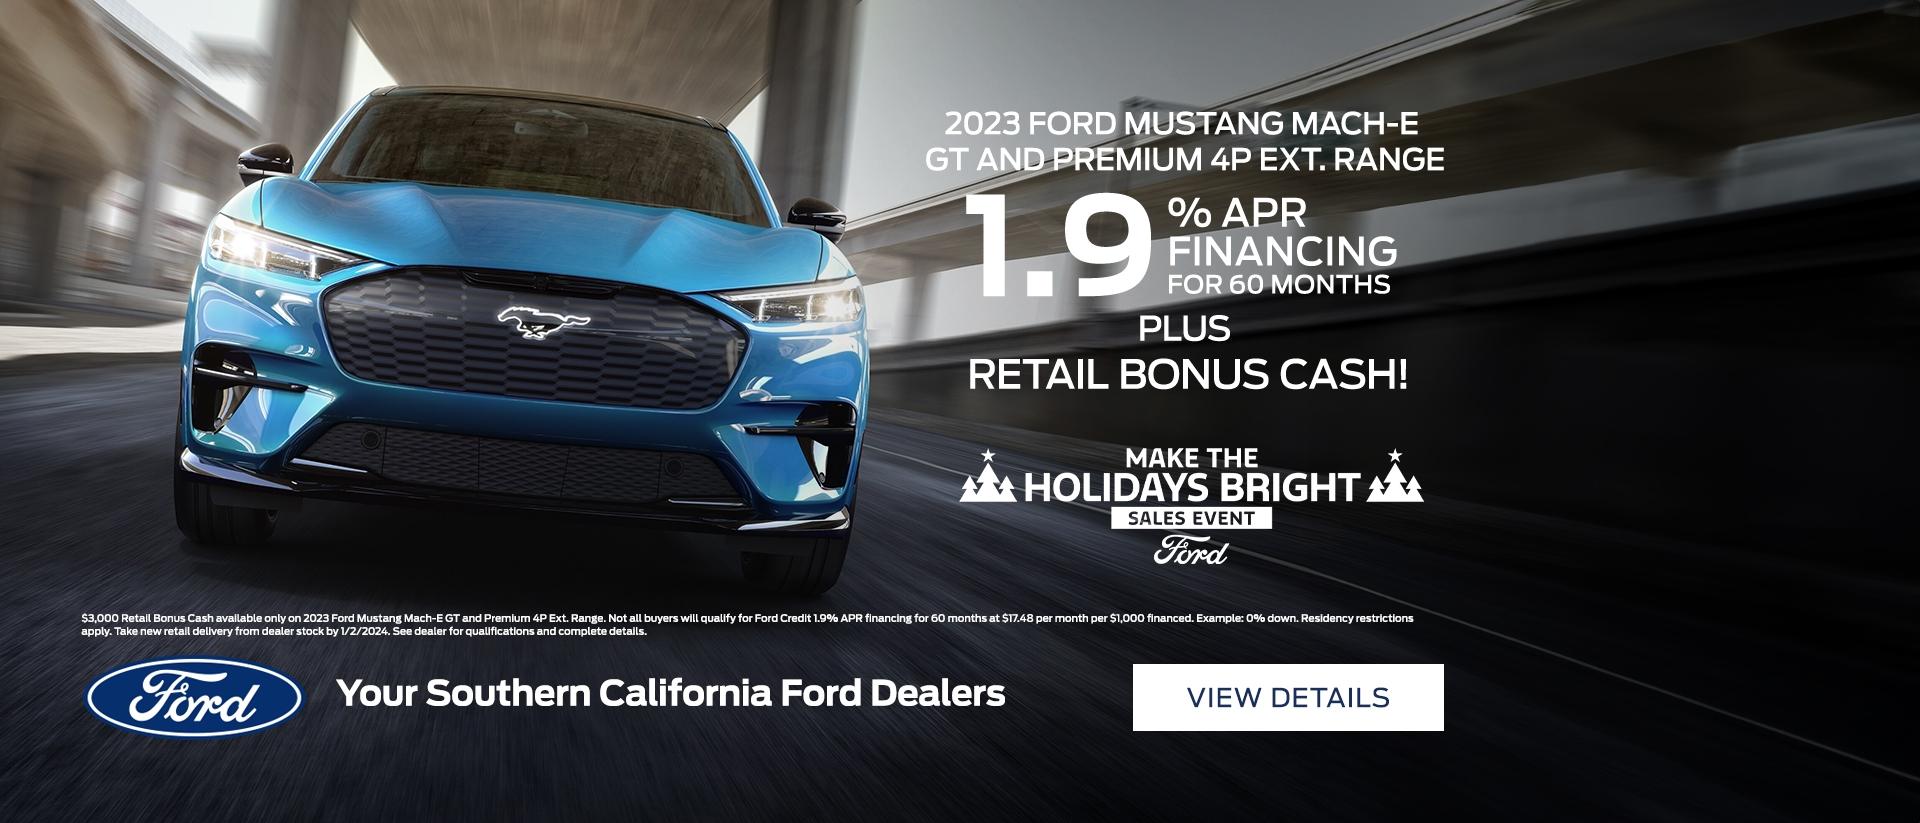 Make the Holidays Bright Sales Event | Ford Mustang Mach-E Purchase Offer | Southern California Ford Dealers